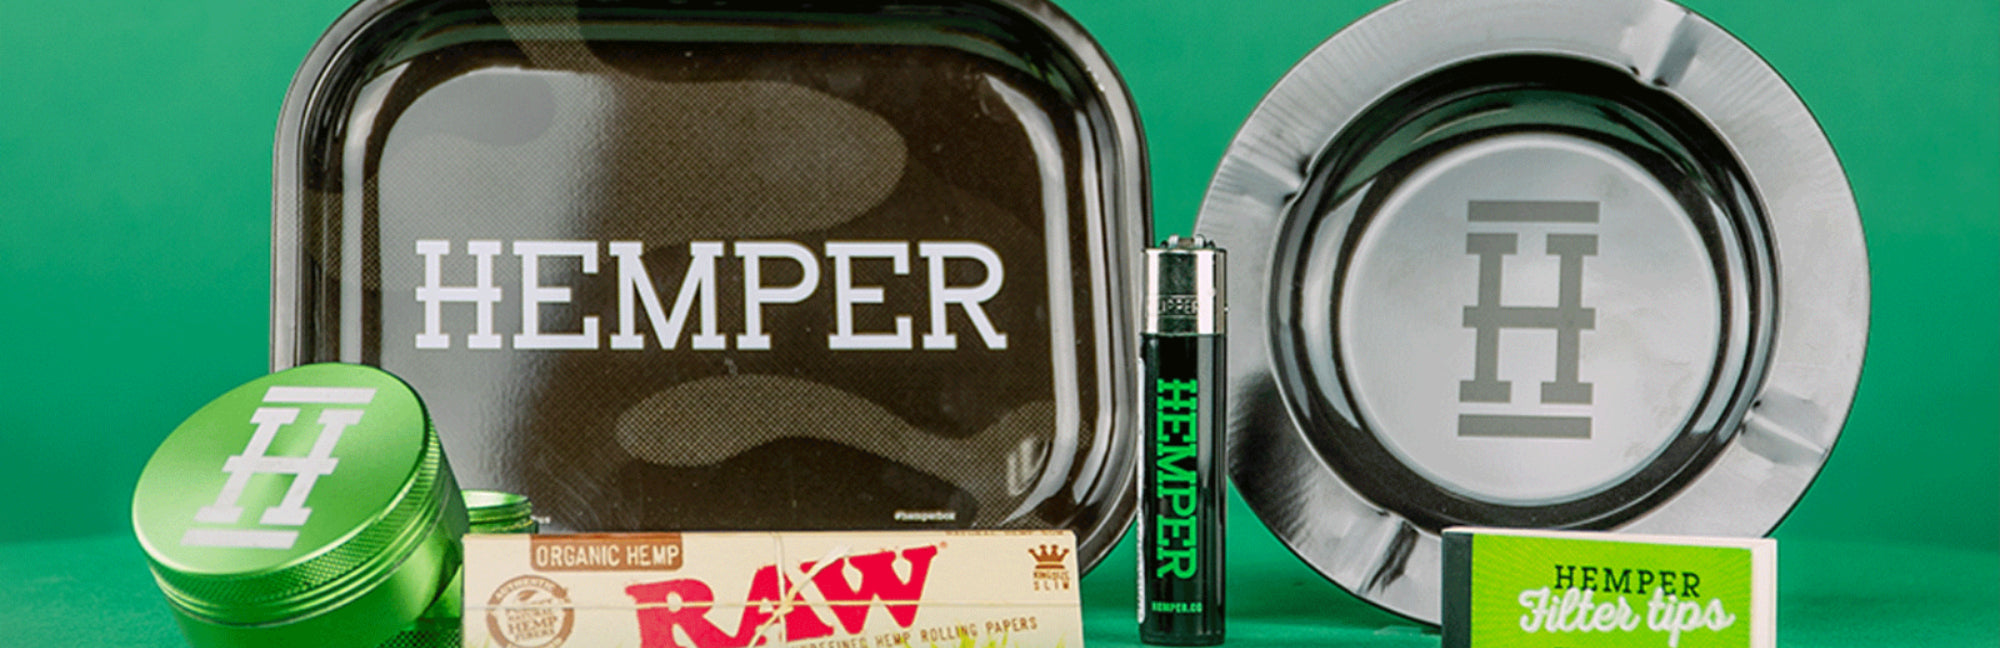 6 Of Our Favorite Hemper Products For Your Smoking Experience